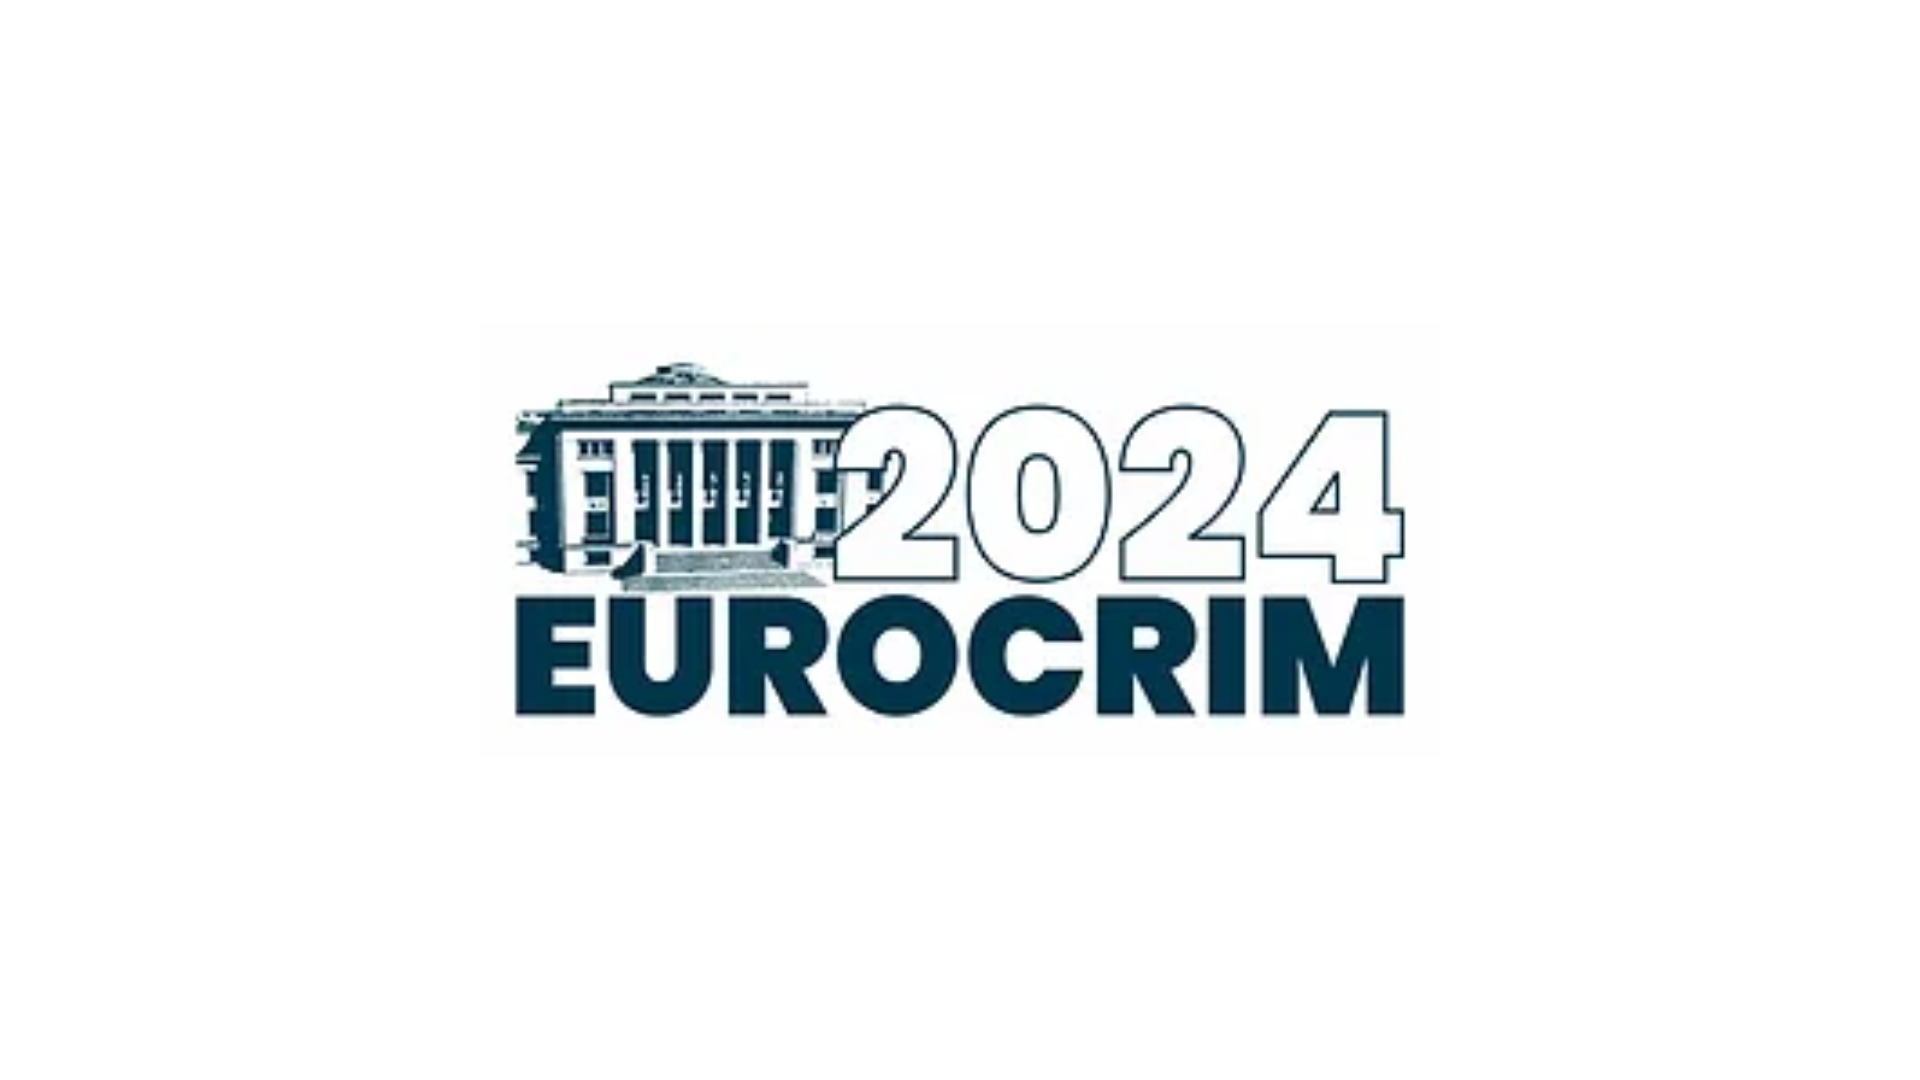 24rd Annual Conference of the European Society of Criminology (ESC2024)